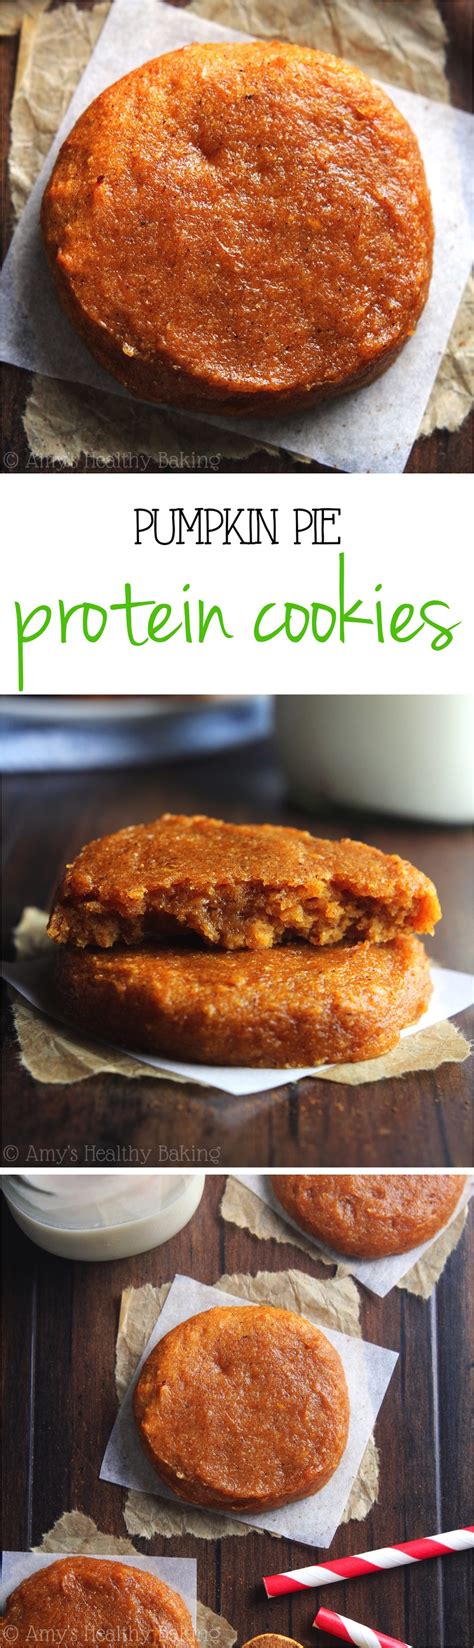 I've been a bit obsessed with cookies and everything pumpkin lately, lol. Pumpkin Pie Protein Cookies | Amy's Healthy Baking